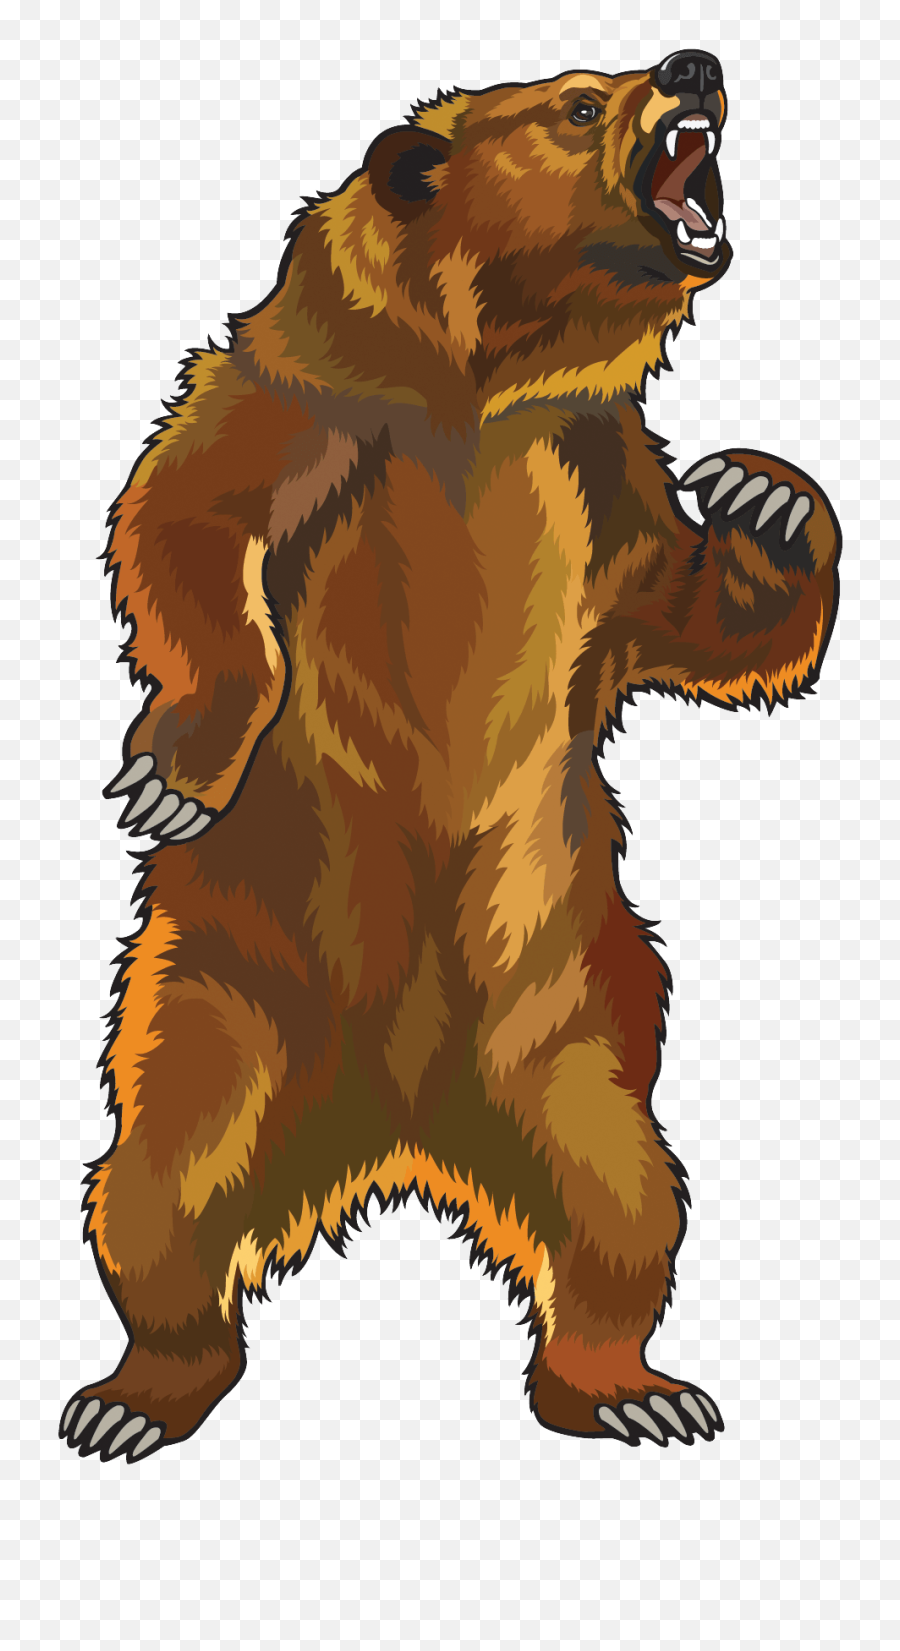 Angry Bear Png - Angry Grizzly Bear Standing Grizzly Bear Grizzly Bear Clipart Emoji,Bear Png